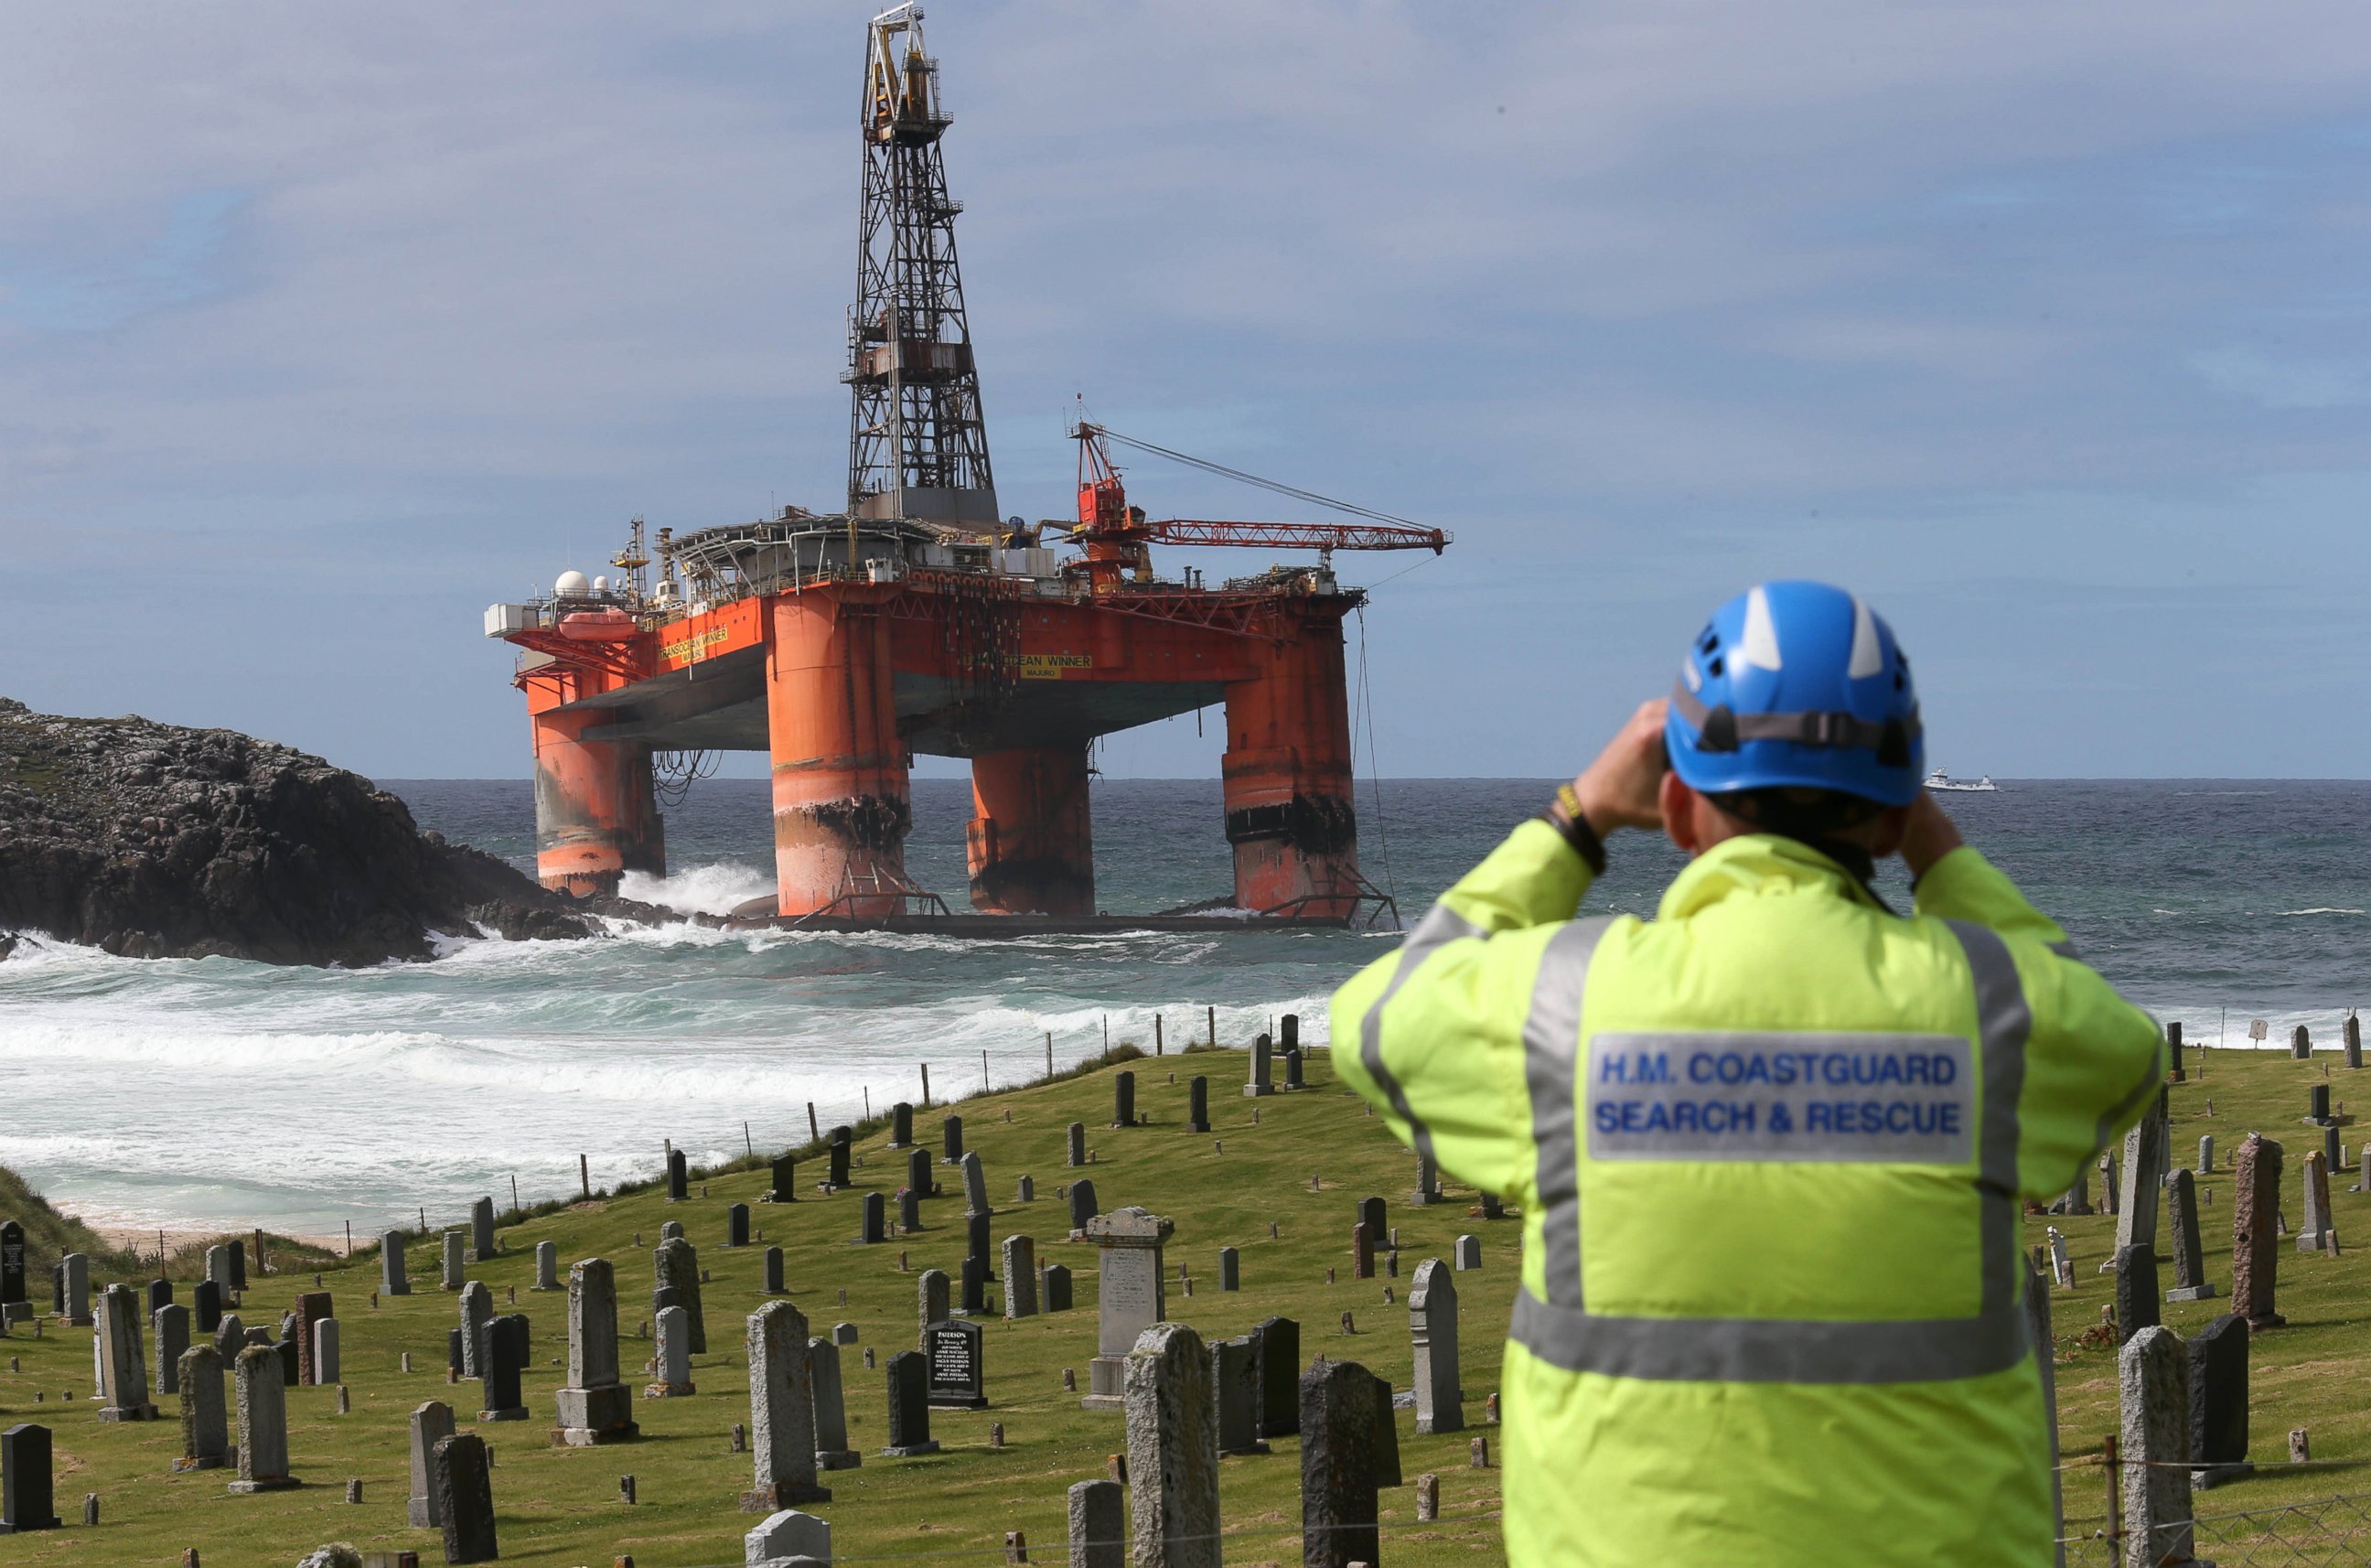 PHOTO: A coastguard official monitors the Transocean Winner drilling rig off the coast of the Isle of Lewis, Scotland, after it ran aground in severe weather conditions, Aug. 9, 2016.